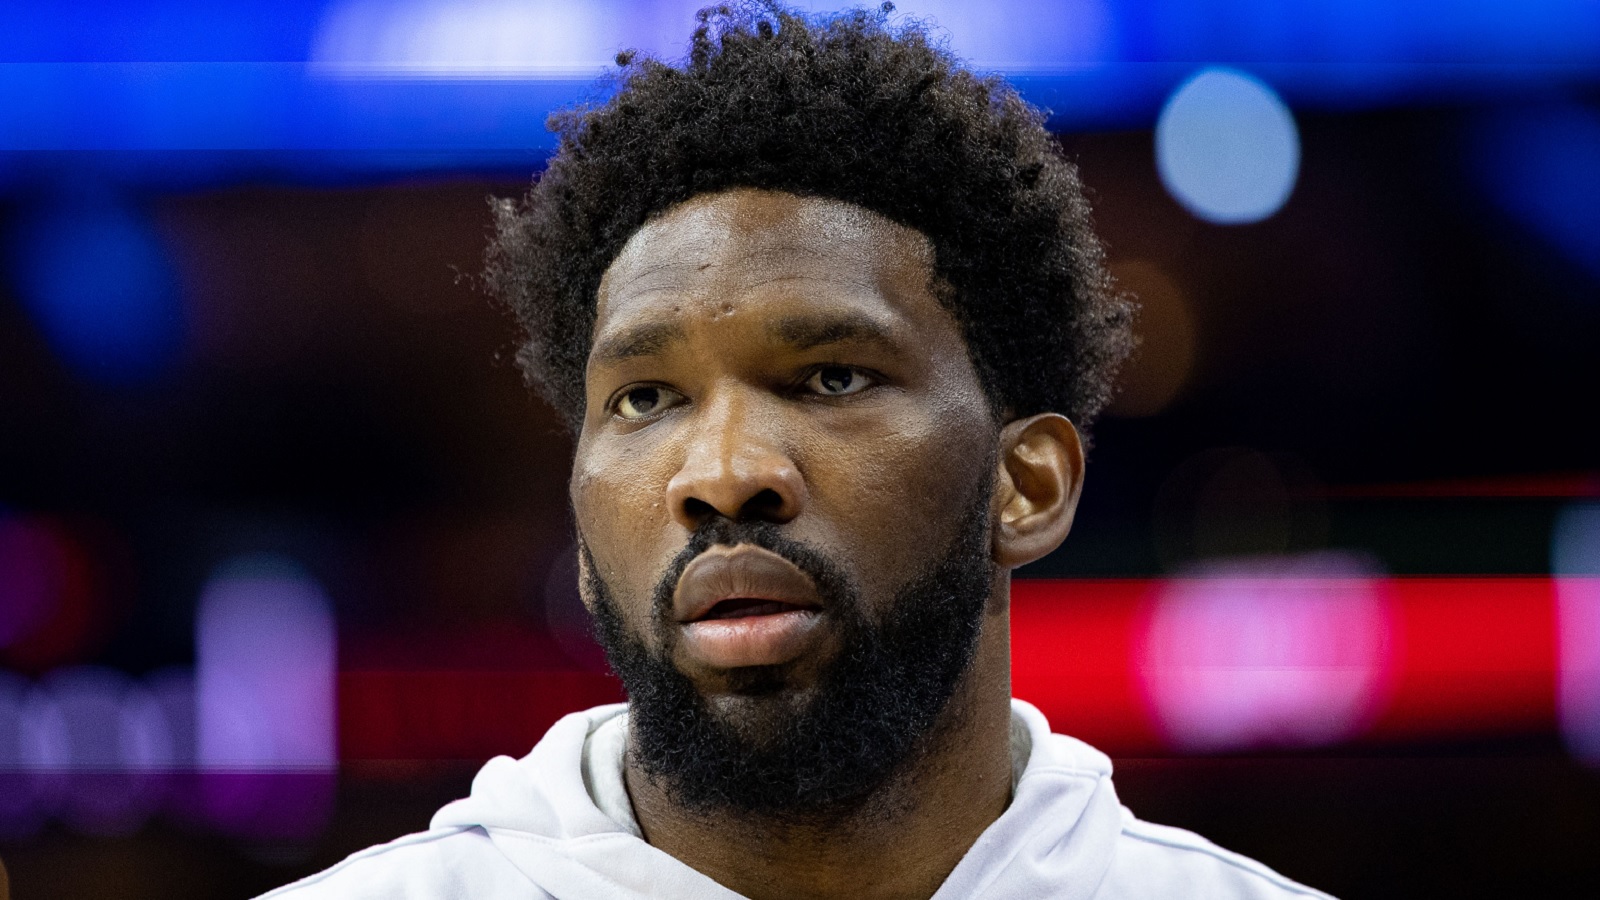 Joel Embiid offers first comments on not winning NBA MVP